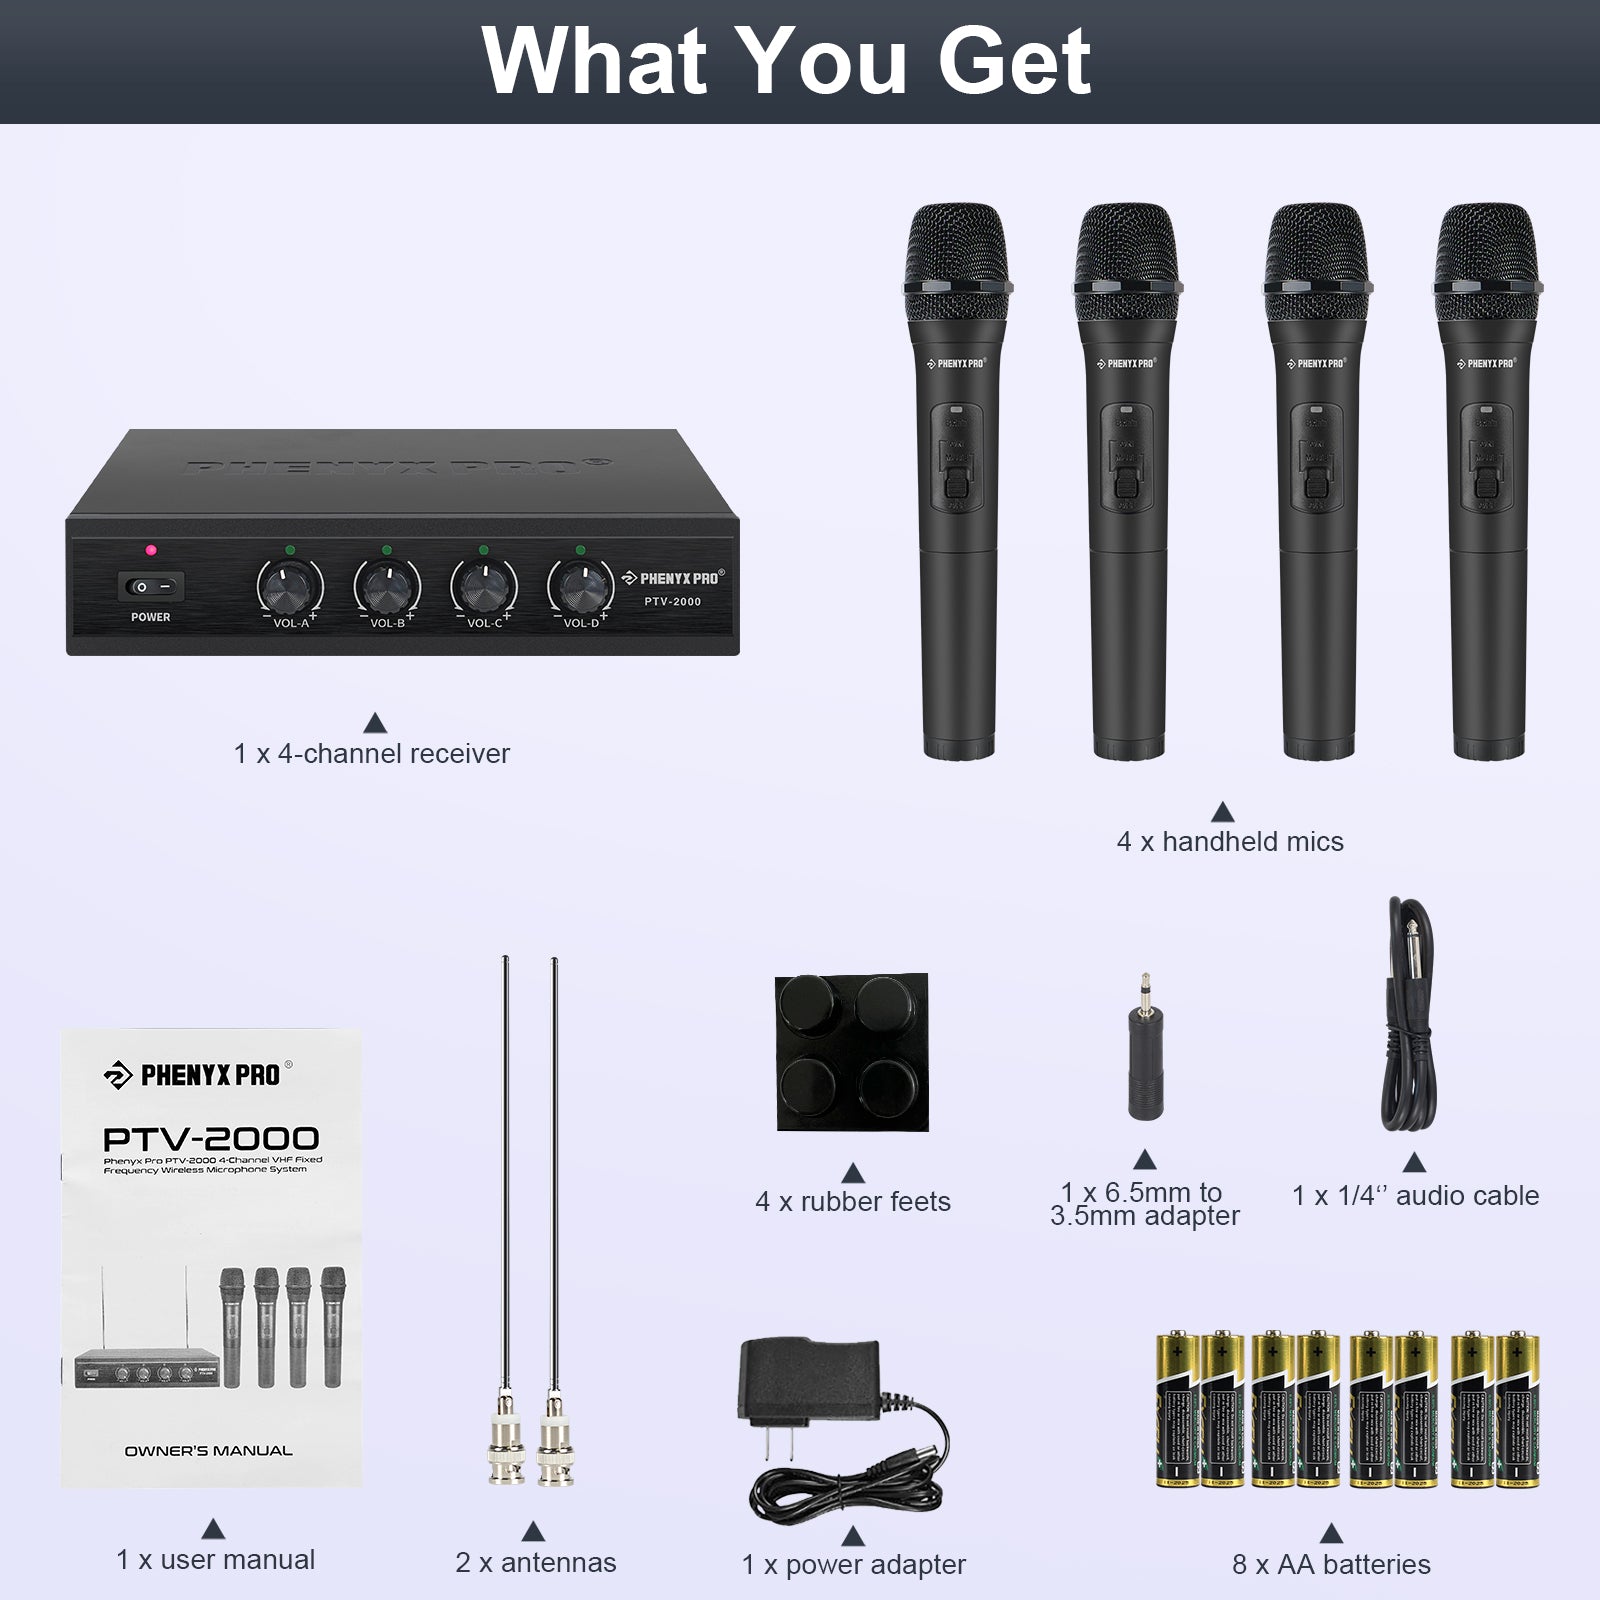 Phenyx Pro PTV-2000A Quad-Channel VHF Wireless Microphone System, come with 4 handheld mics and BNC antenna